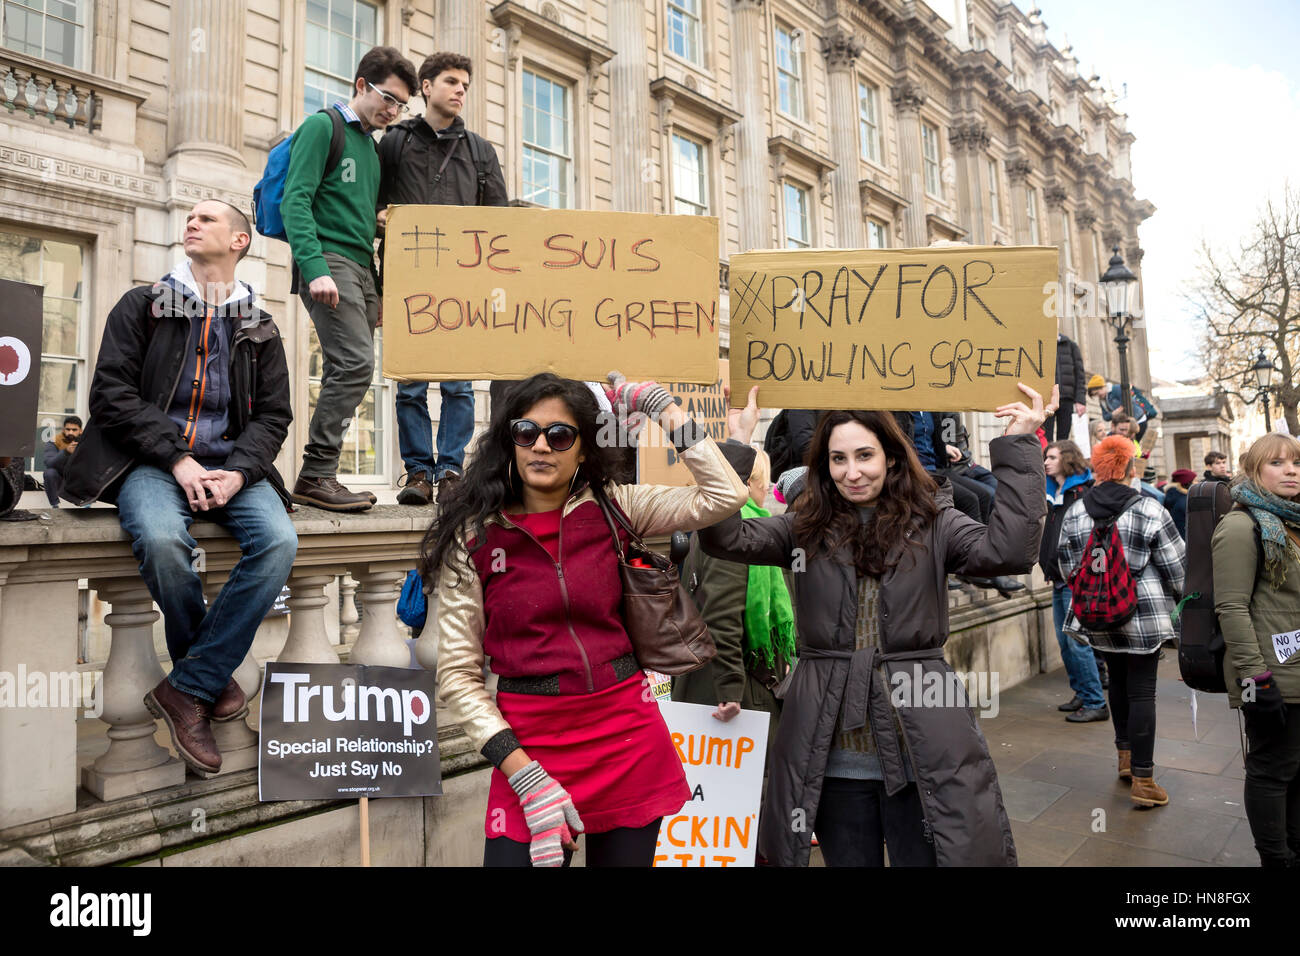 Stop Trump March. A protest march was held in London to call for the ban on the Muslim countries to be lifted. Stock Photo